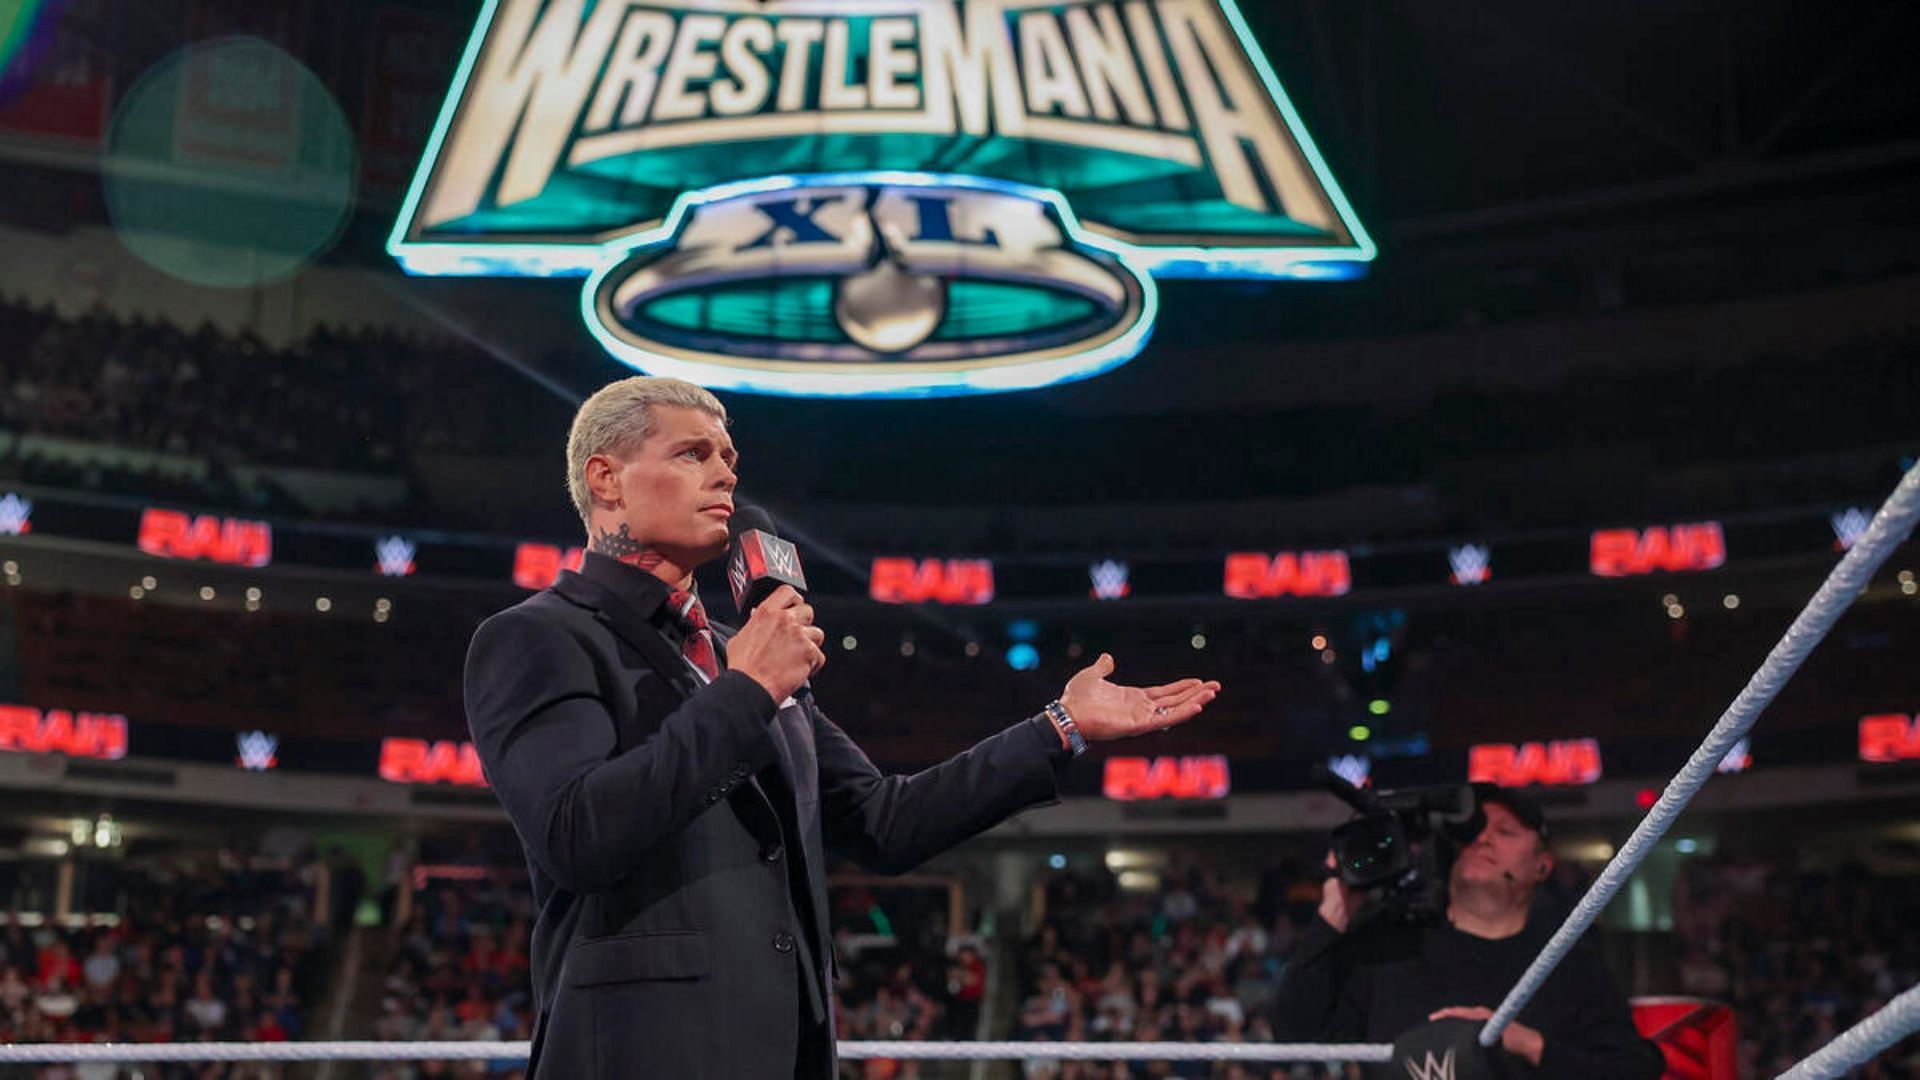 Cody Rhodes is set to main event of WrestleMania for the second straight year [Photo courtesy of WWE